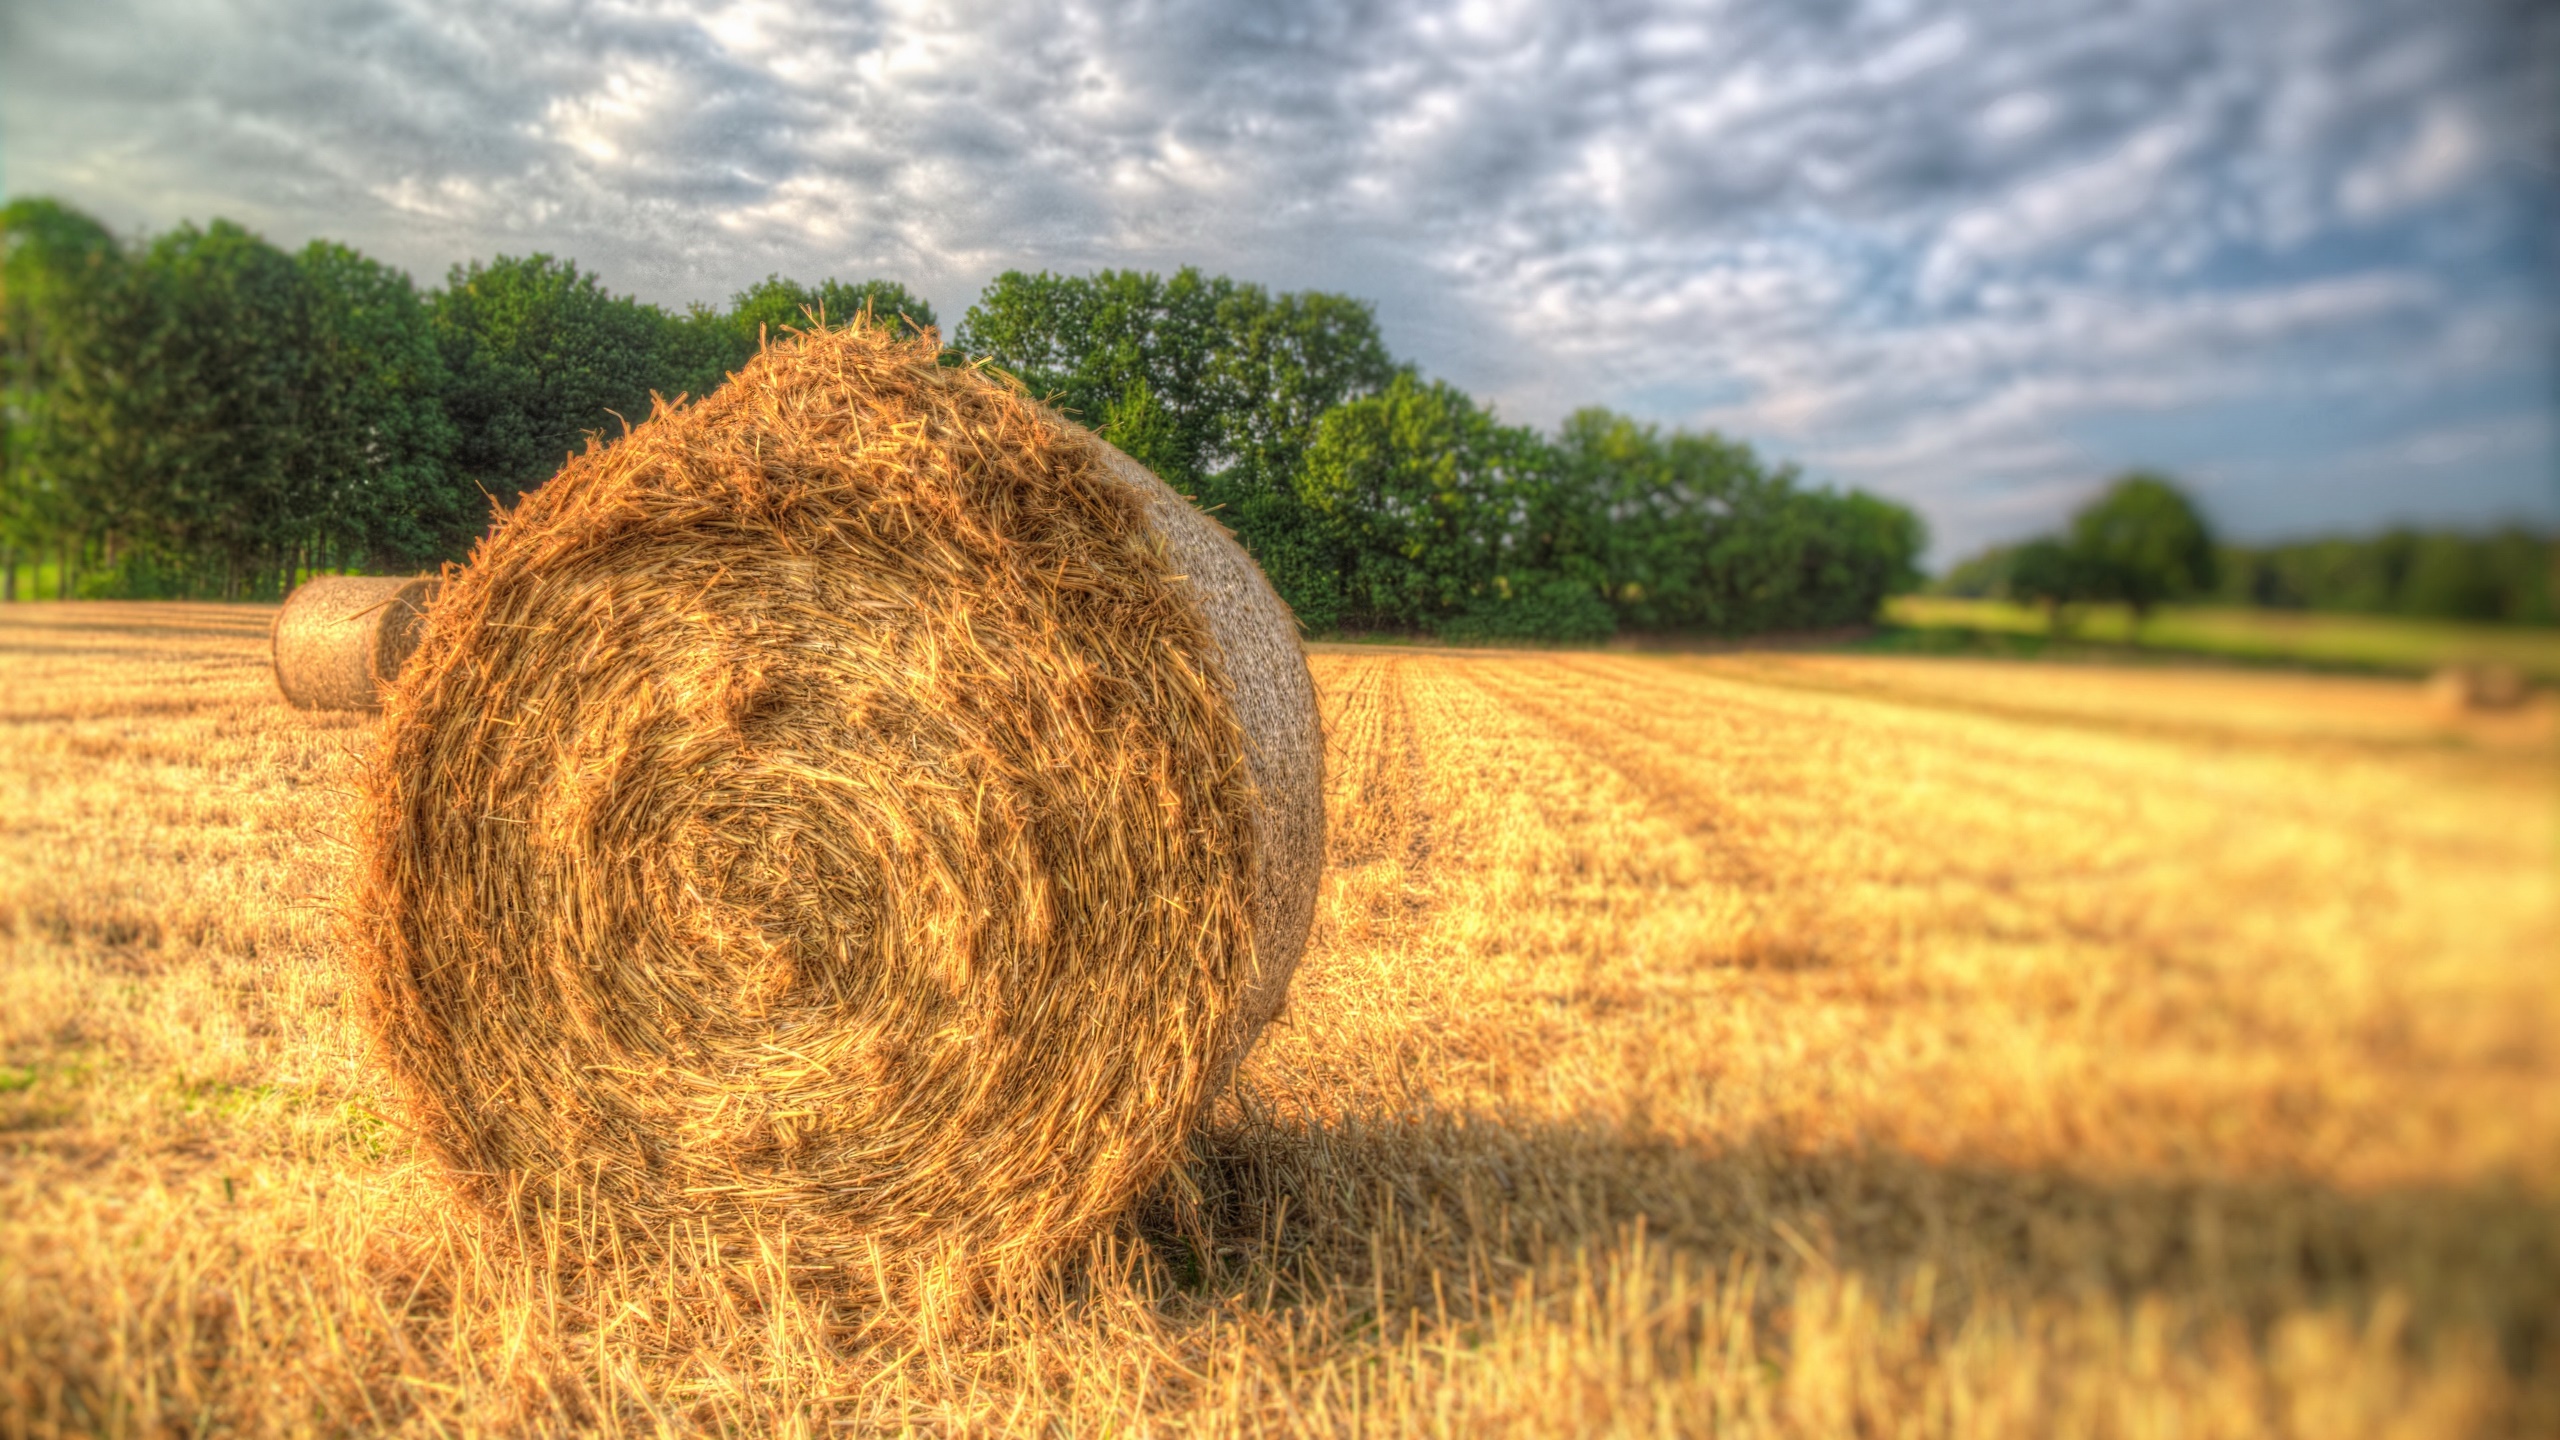 Outdoors Field Straw Hay Bales 2560x1440